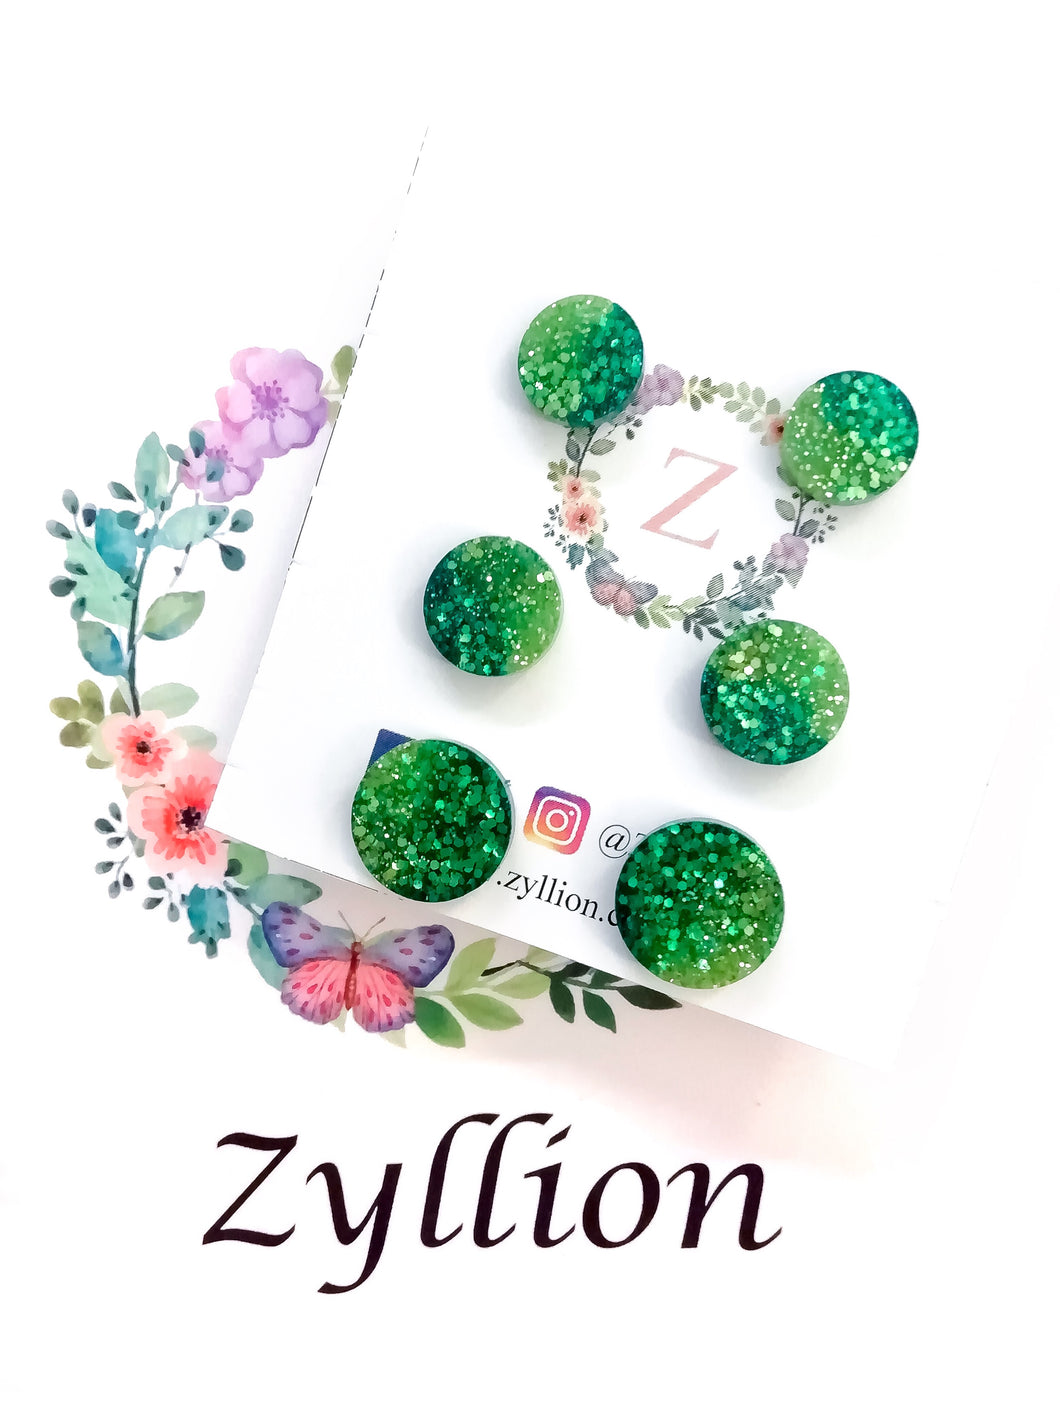 Colour Gradient Round Studs Sterling Silver Earrings - Zyllion